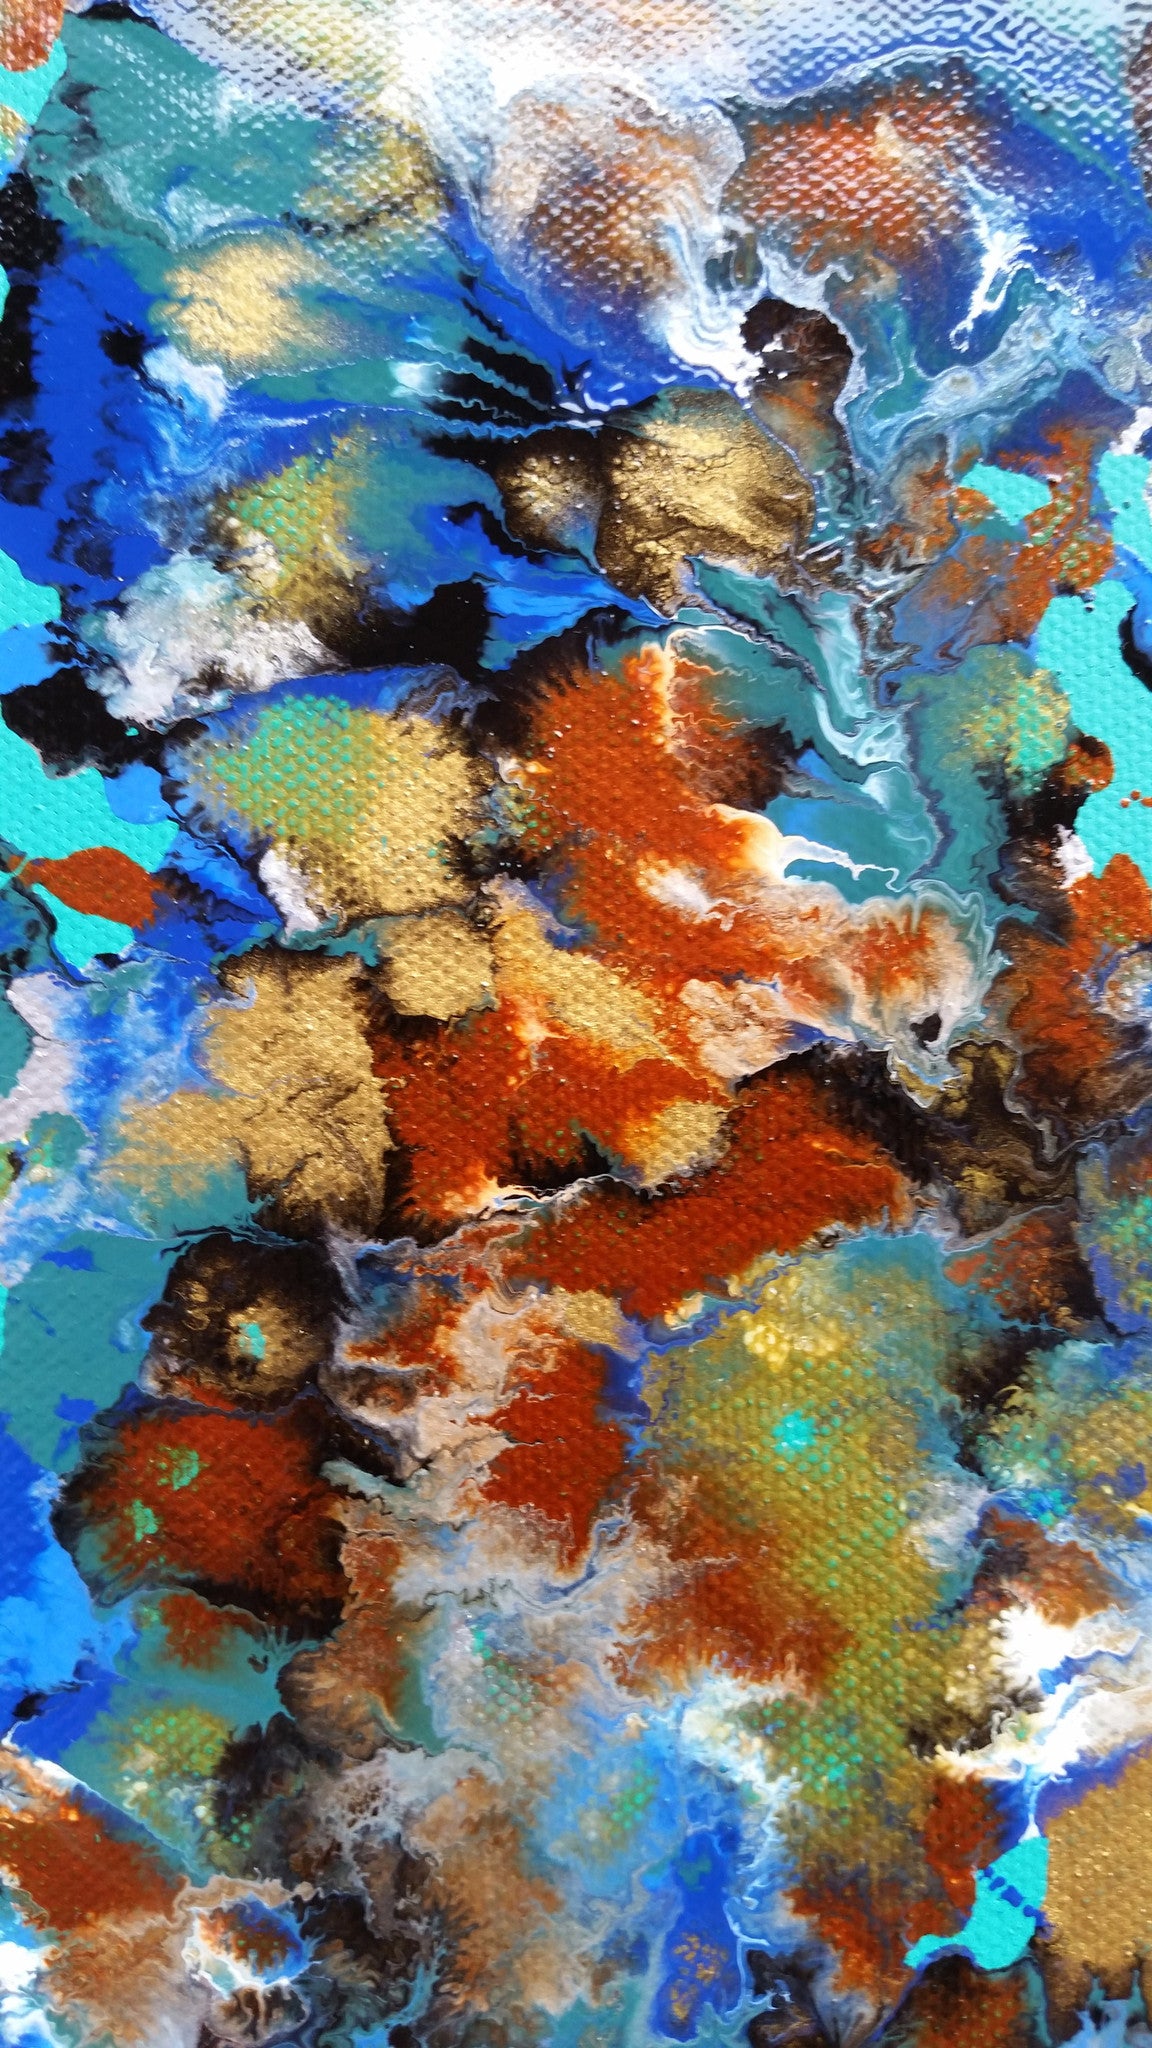 Abstract Fluid Painting Mixed-Media Enamel Paint on Canvas Blue Waves Ocean Water Relaxing Calm Colourful High Gloss